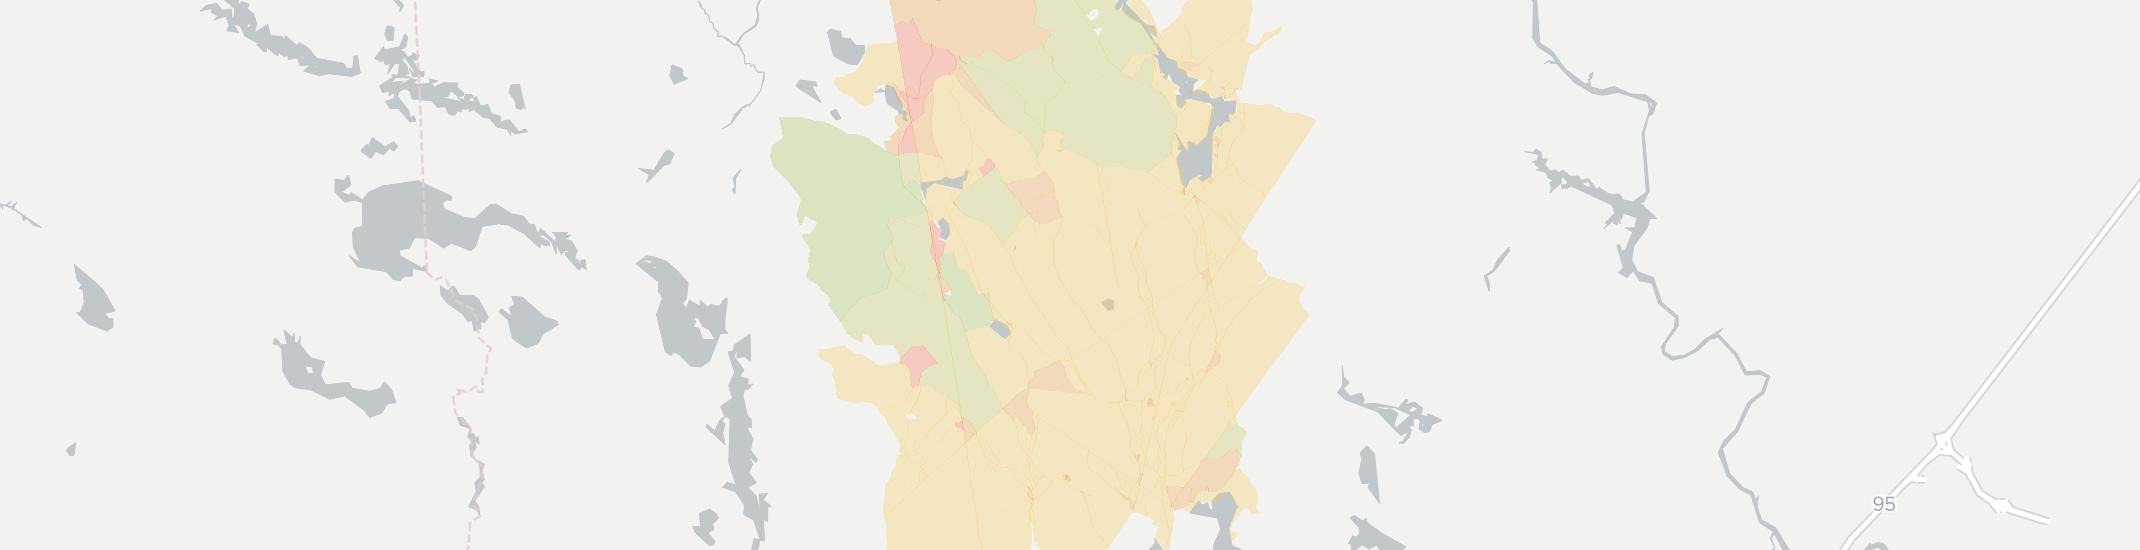 Waterboro Internet Competition Map. Click for interactive map